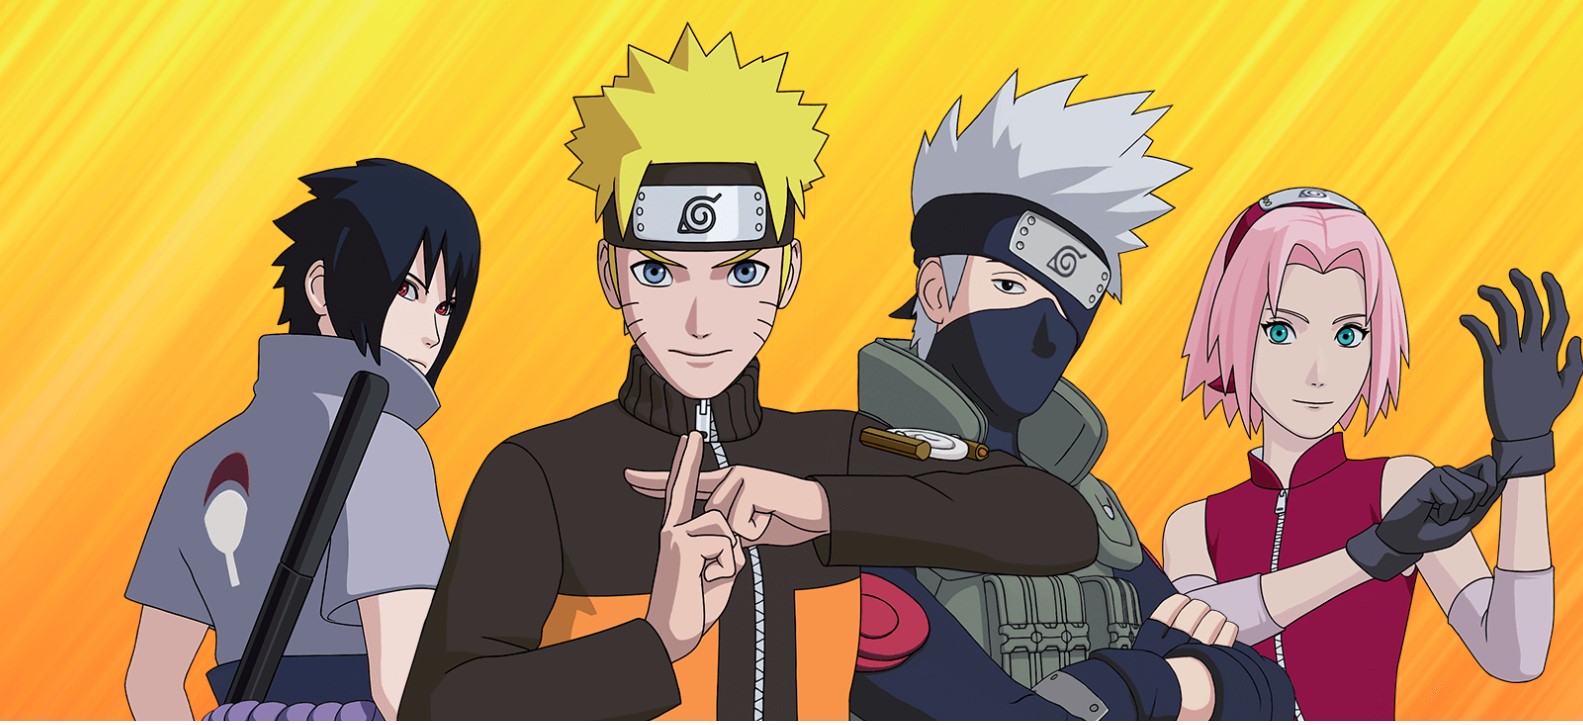 Fortnite x Naruto Collaboration: Earn Fortnite Items Completing the Nindo Challenges